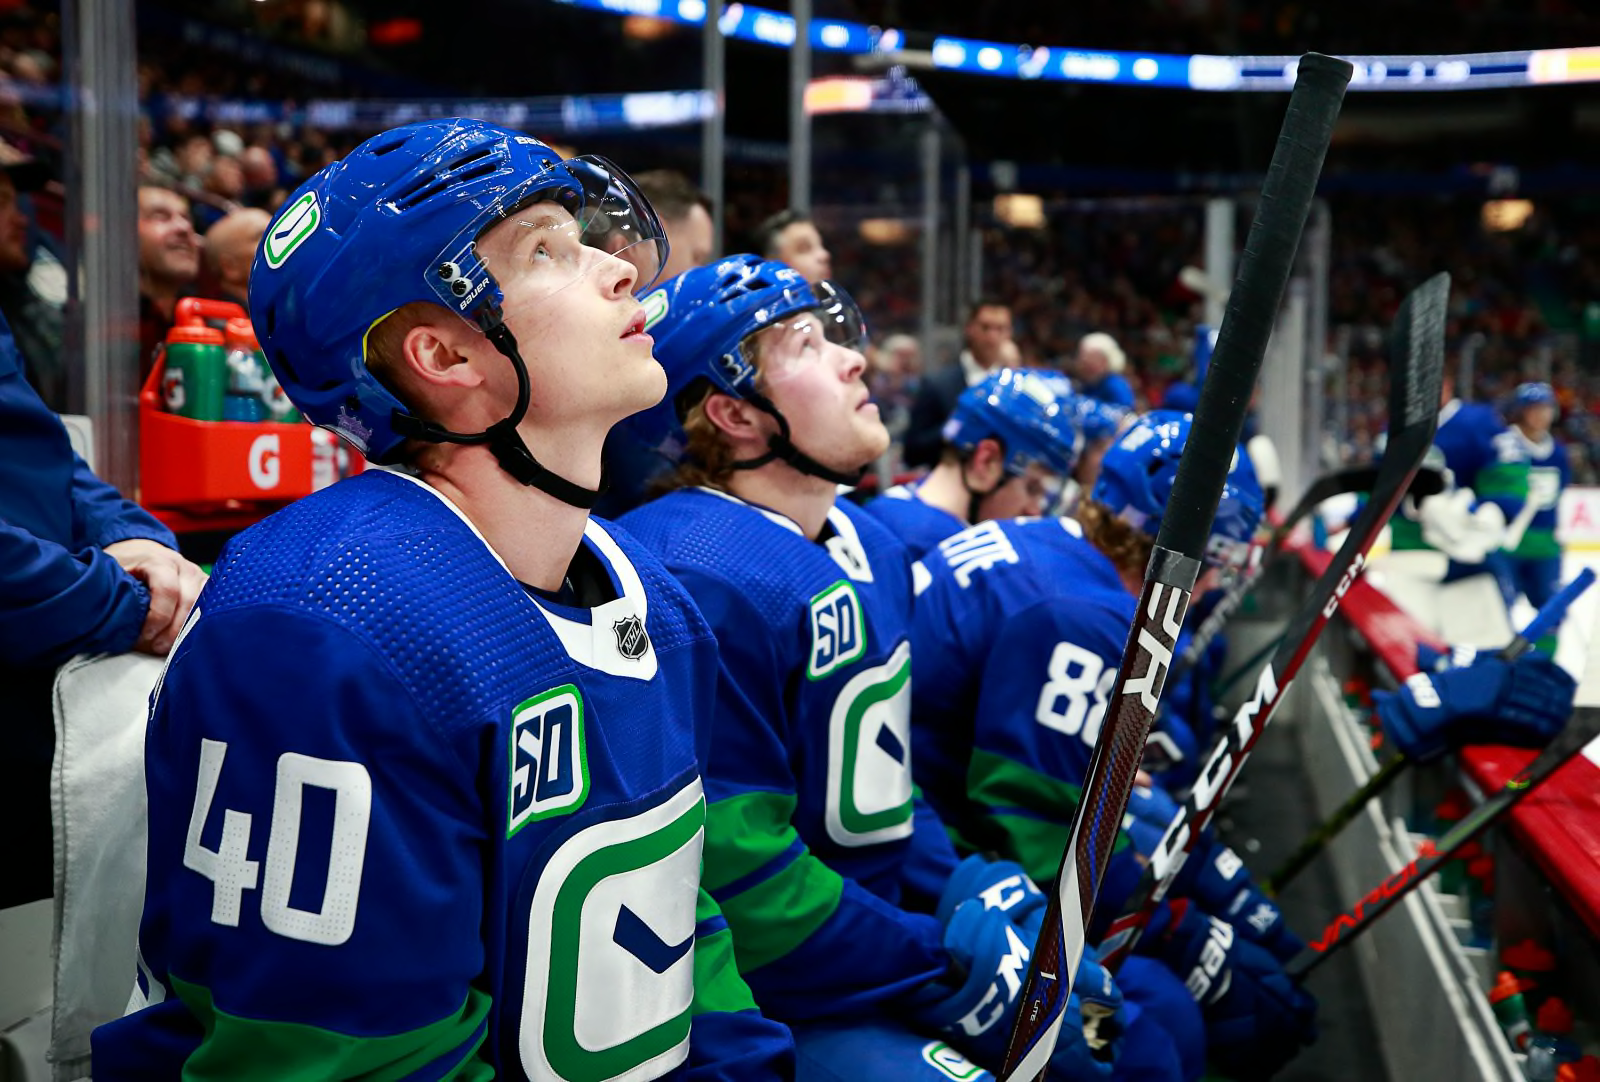 Canucks This team is built to win a Stanley Cup this year